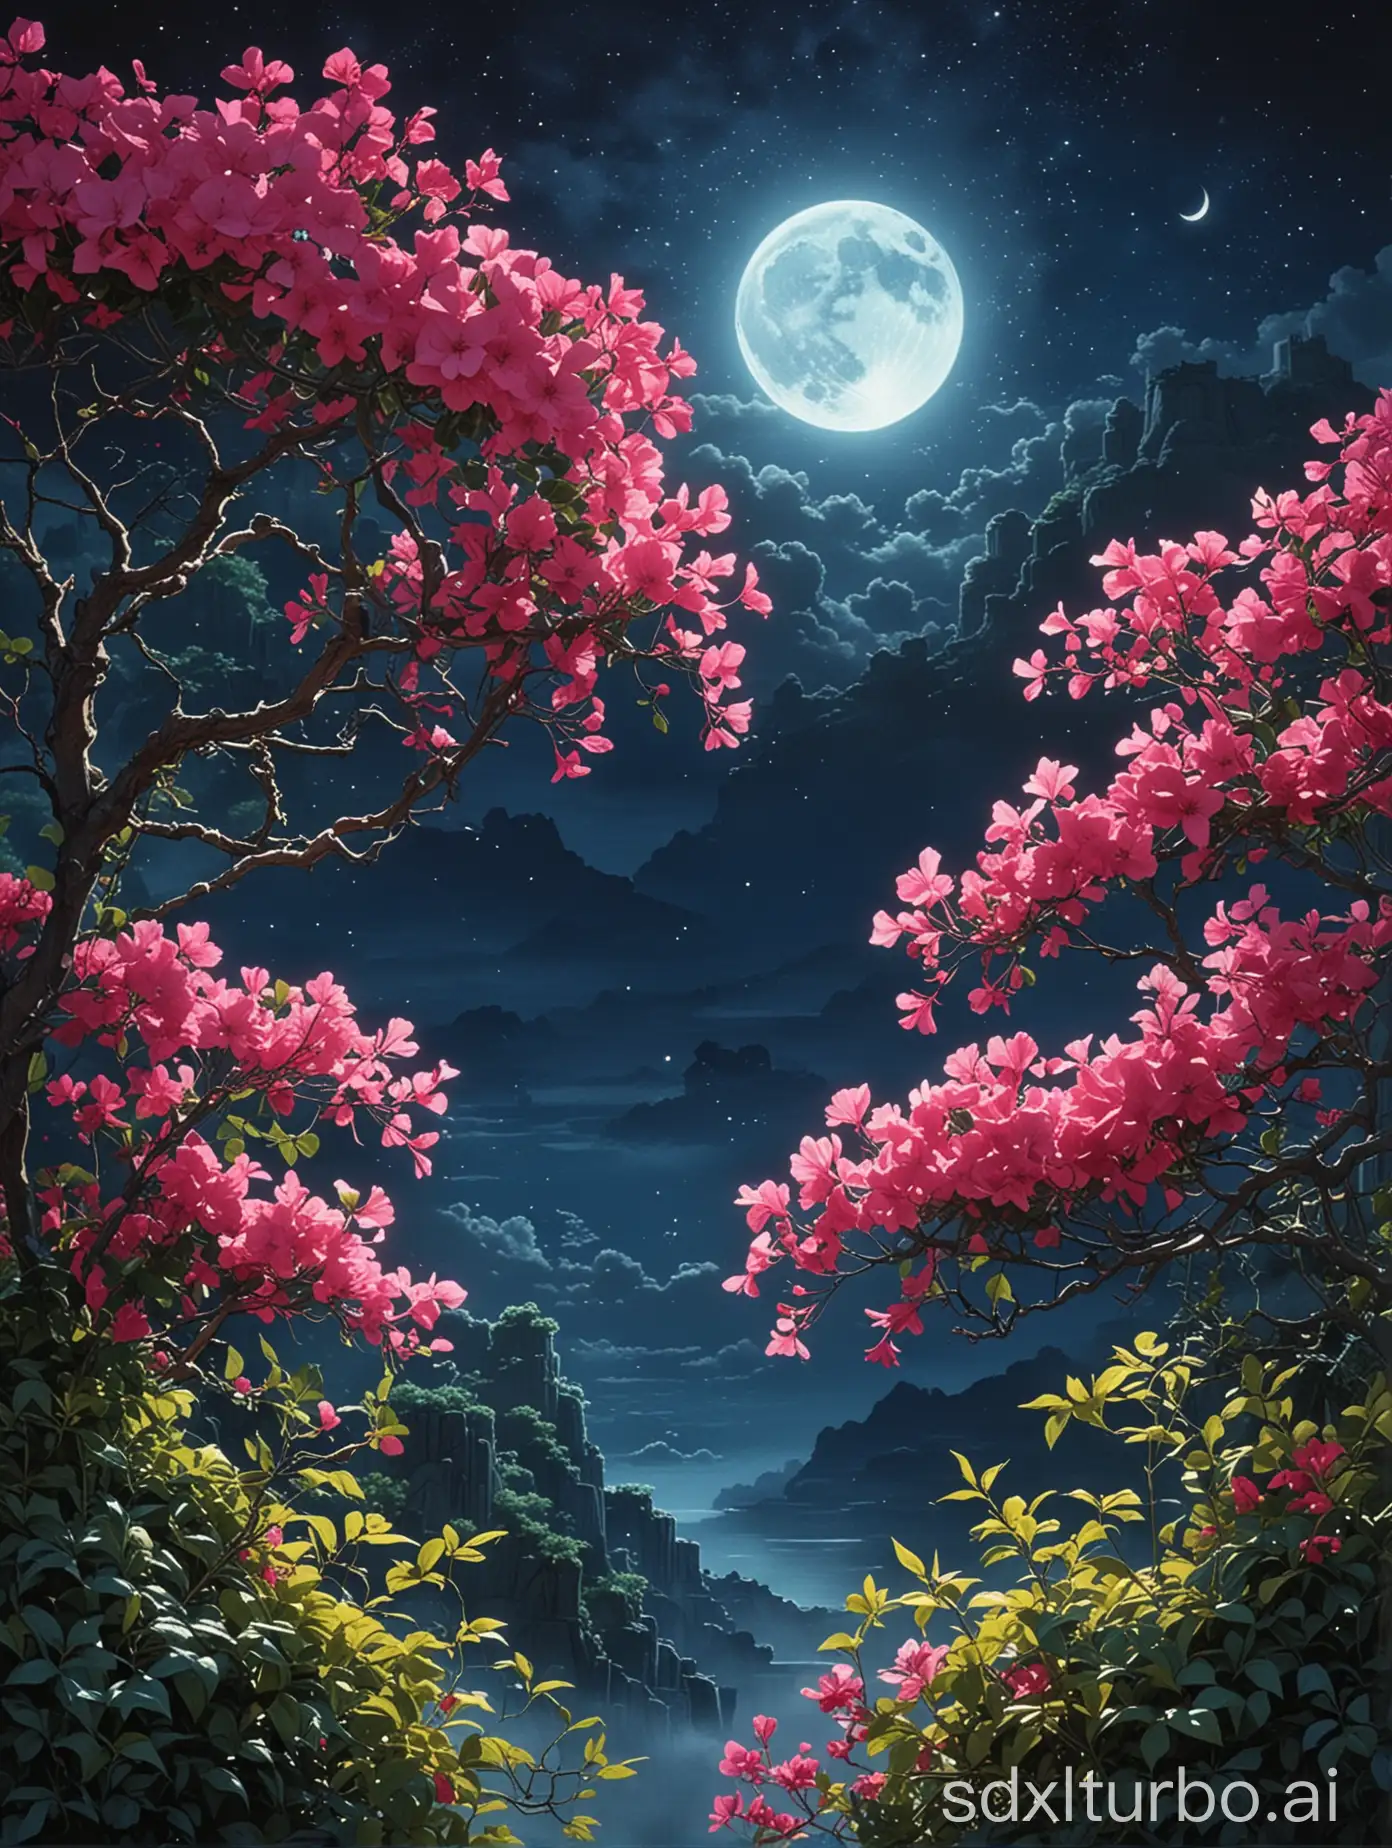 a serene nighttime scene. It features a branch with vibrant pink bougainvillea, in the foreground. These flowers stand out with their rich color and paper-like texture. Behind them, the night sky is painted in shades of dark blue, and a full moon shines brightly, creating a striking contrast. The overall composition suggests a peaceful and tranquil atmosphere, with the natural beauty of the flora complemented by the celestial presence of the moon. There's a poetic balance between the earthly and the cosmic, evoking a sense of calm and wonder,studio Ghibli anime